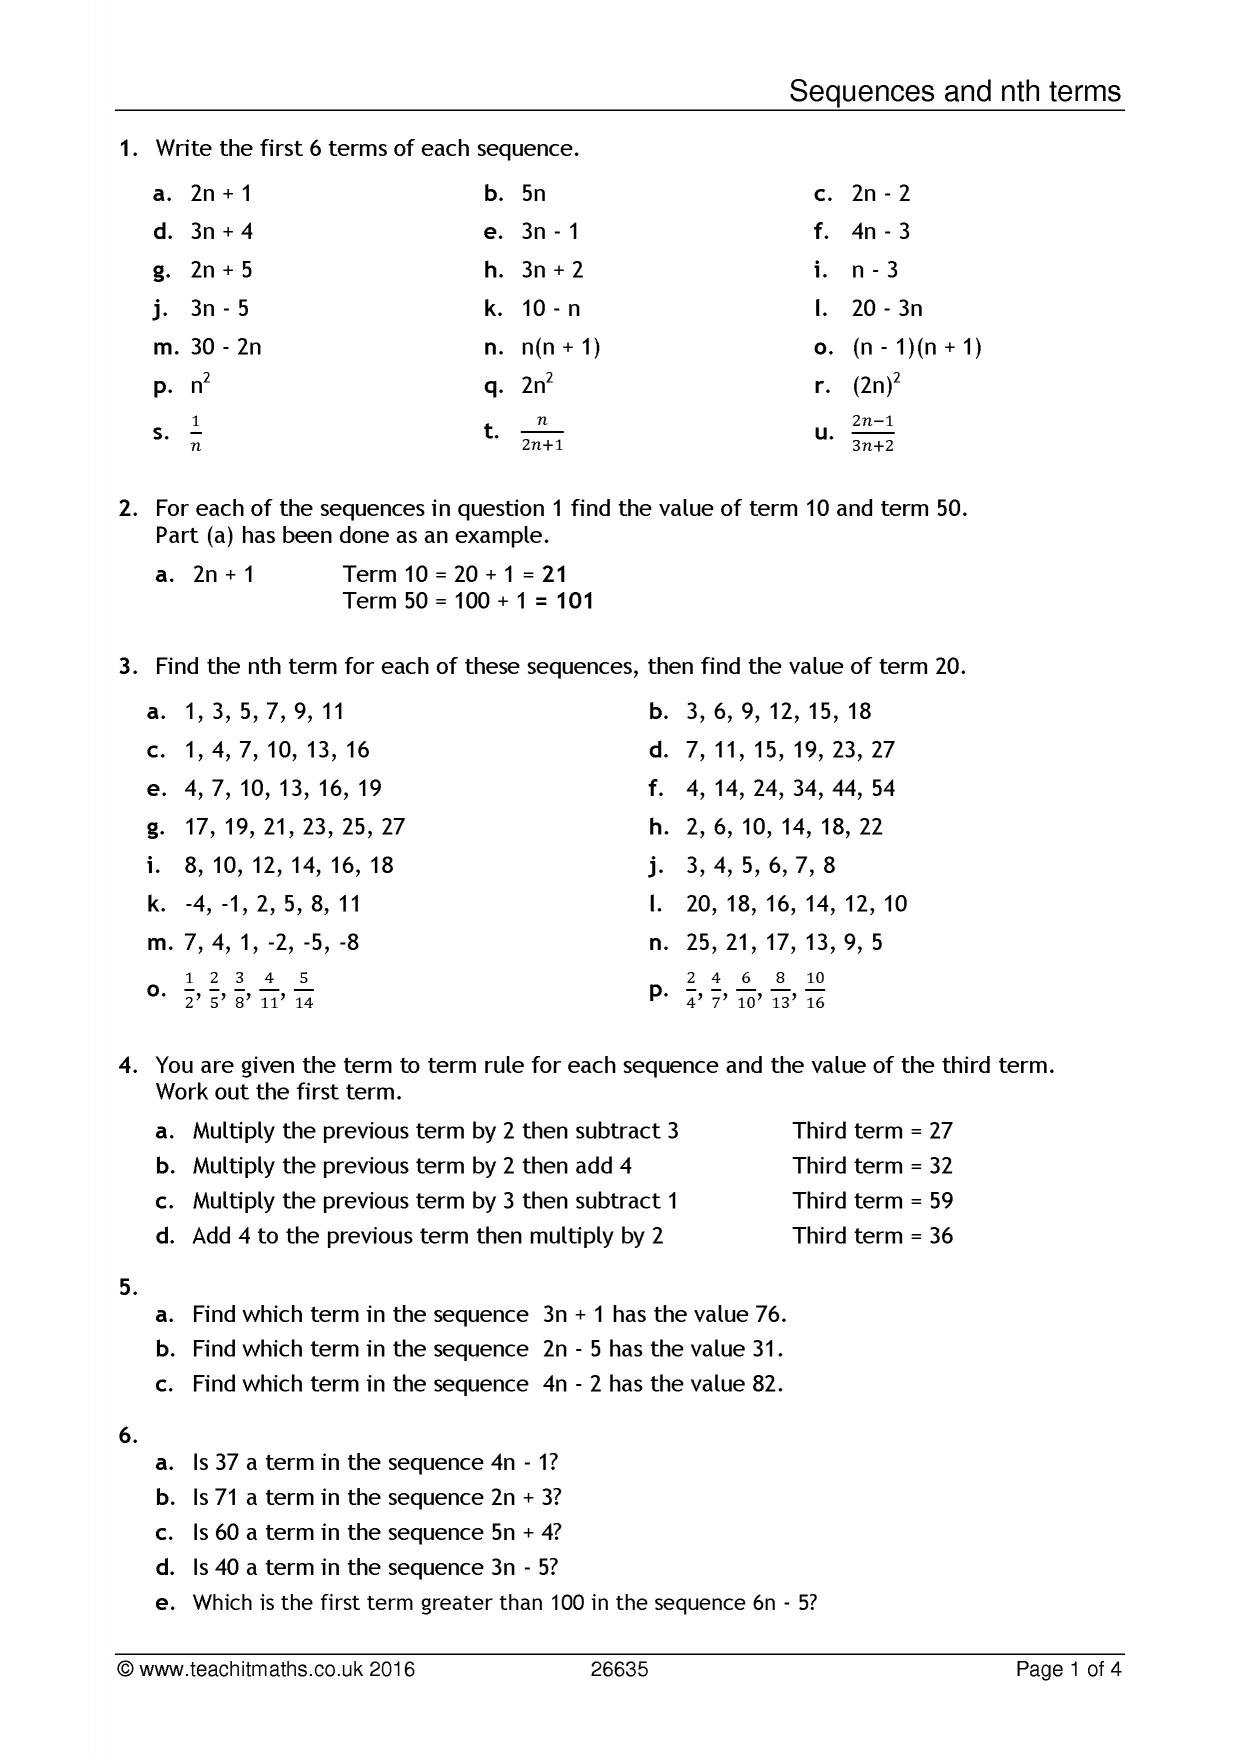 Sequences And Nth Terms Worksheet Pdf  Teachit Maths Intended For Transition To Algebra Worksheets